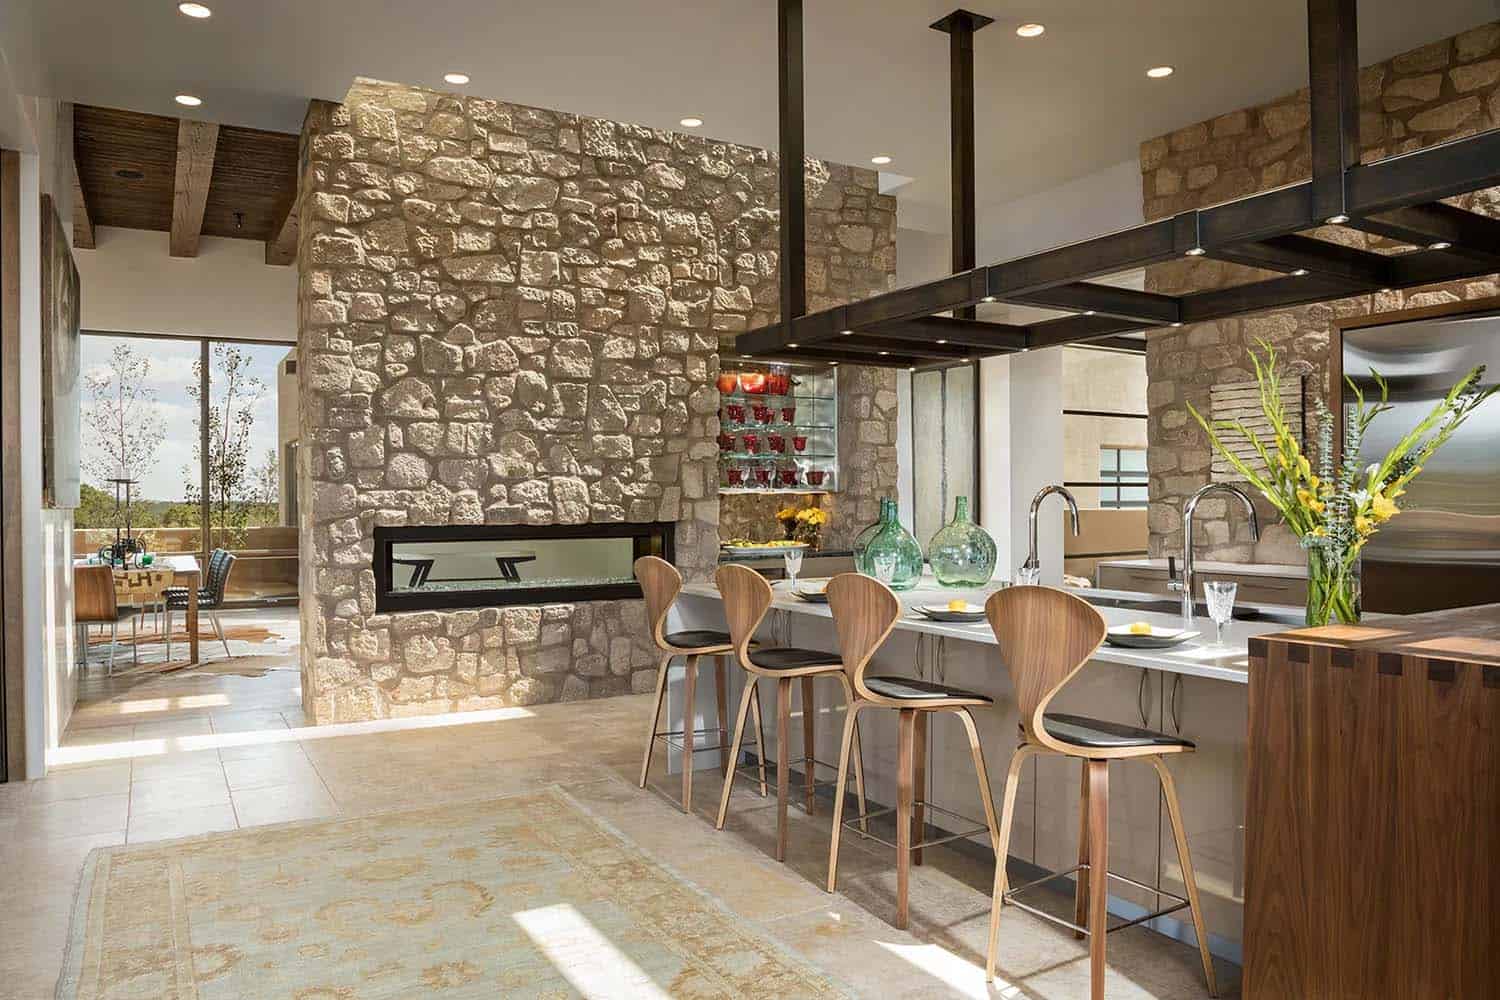 Santa Fe style kitchen with a fireplace